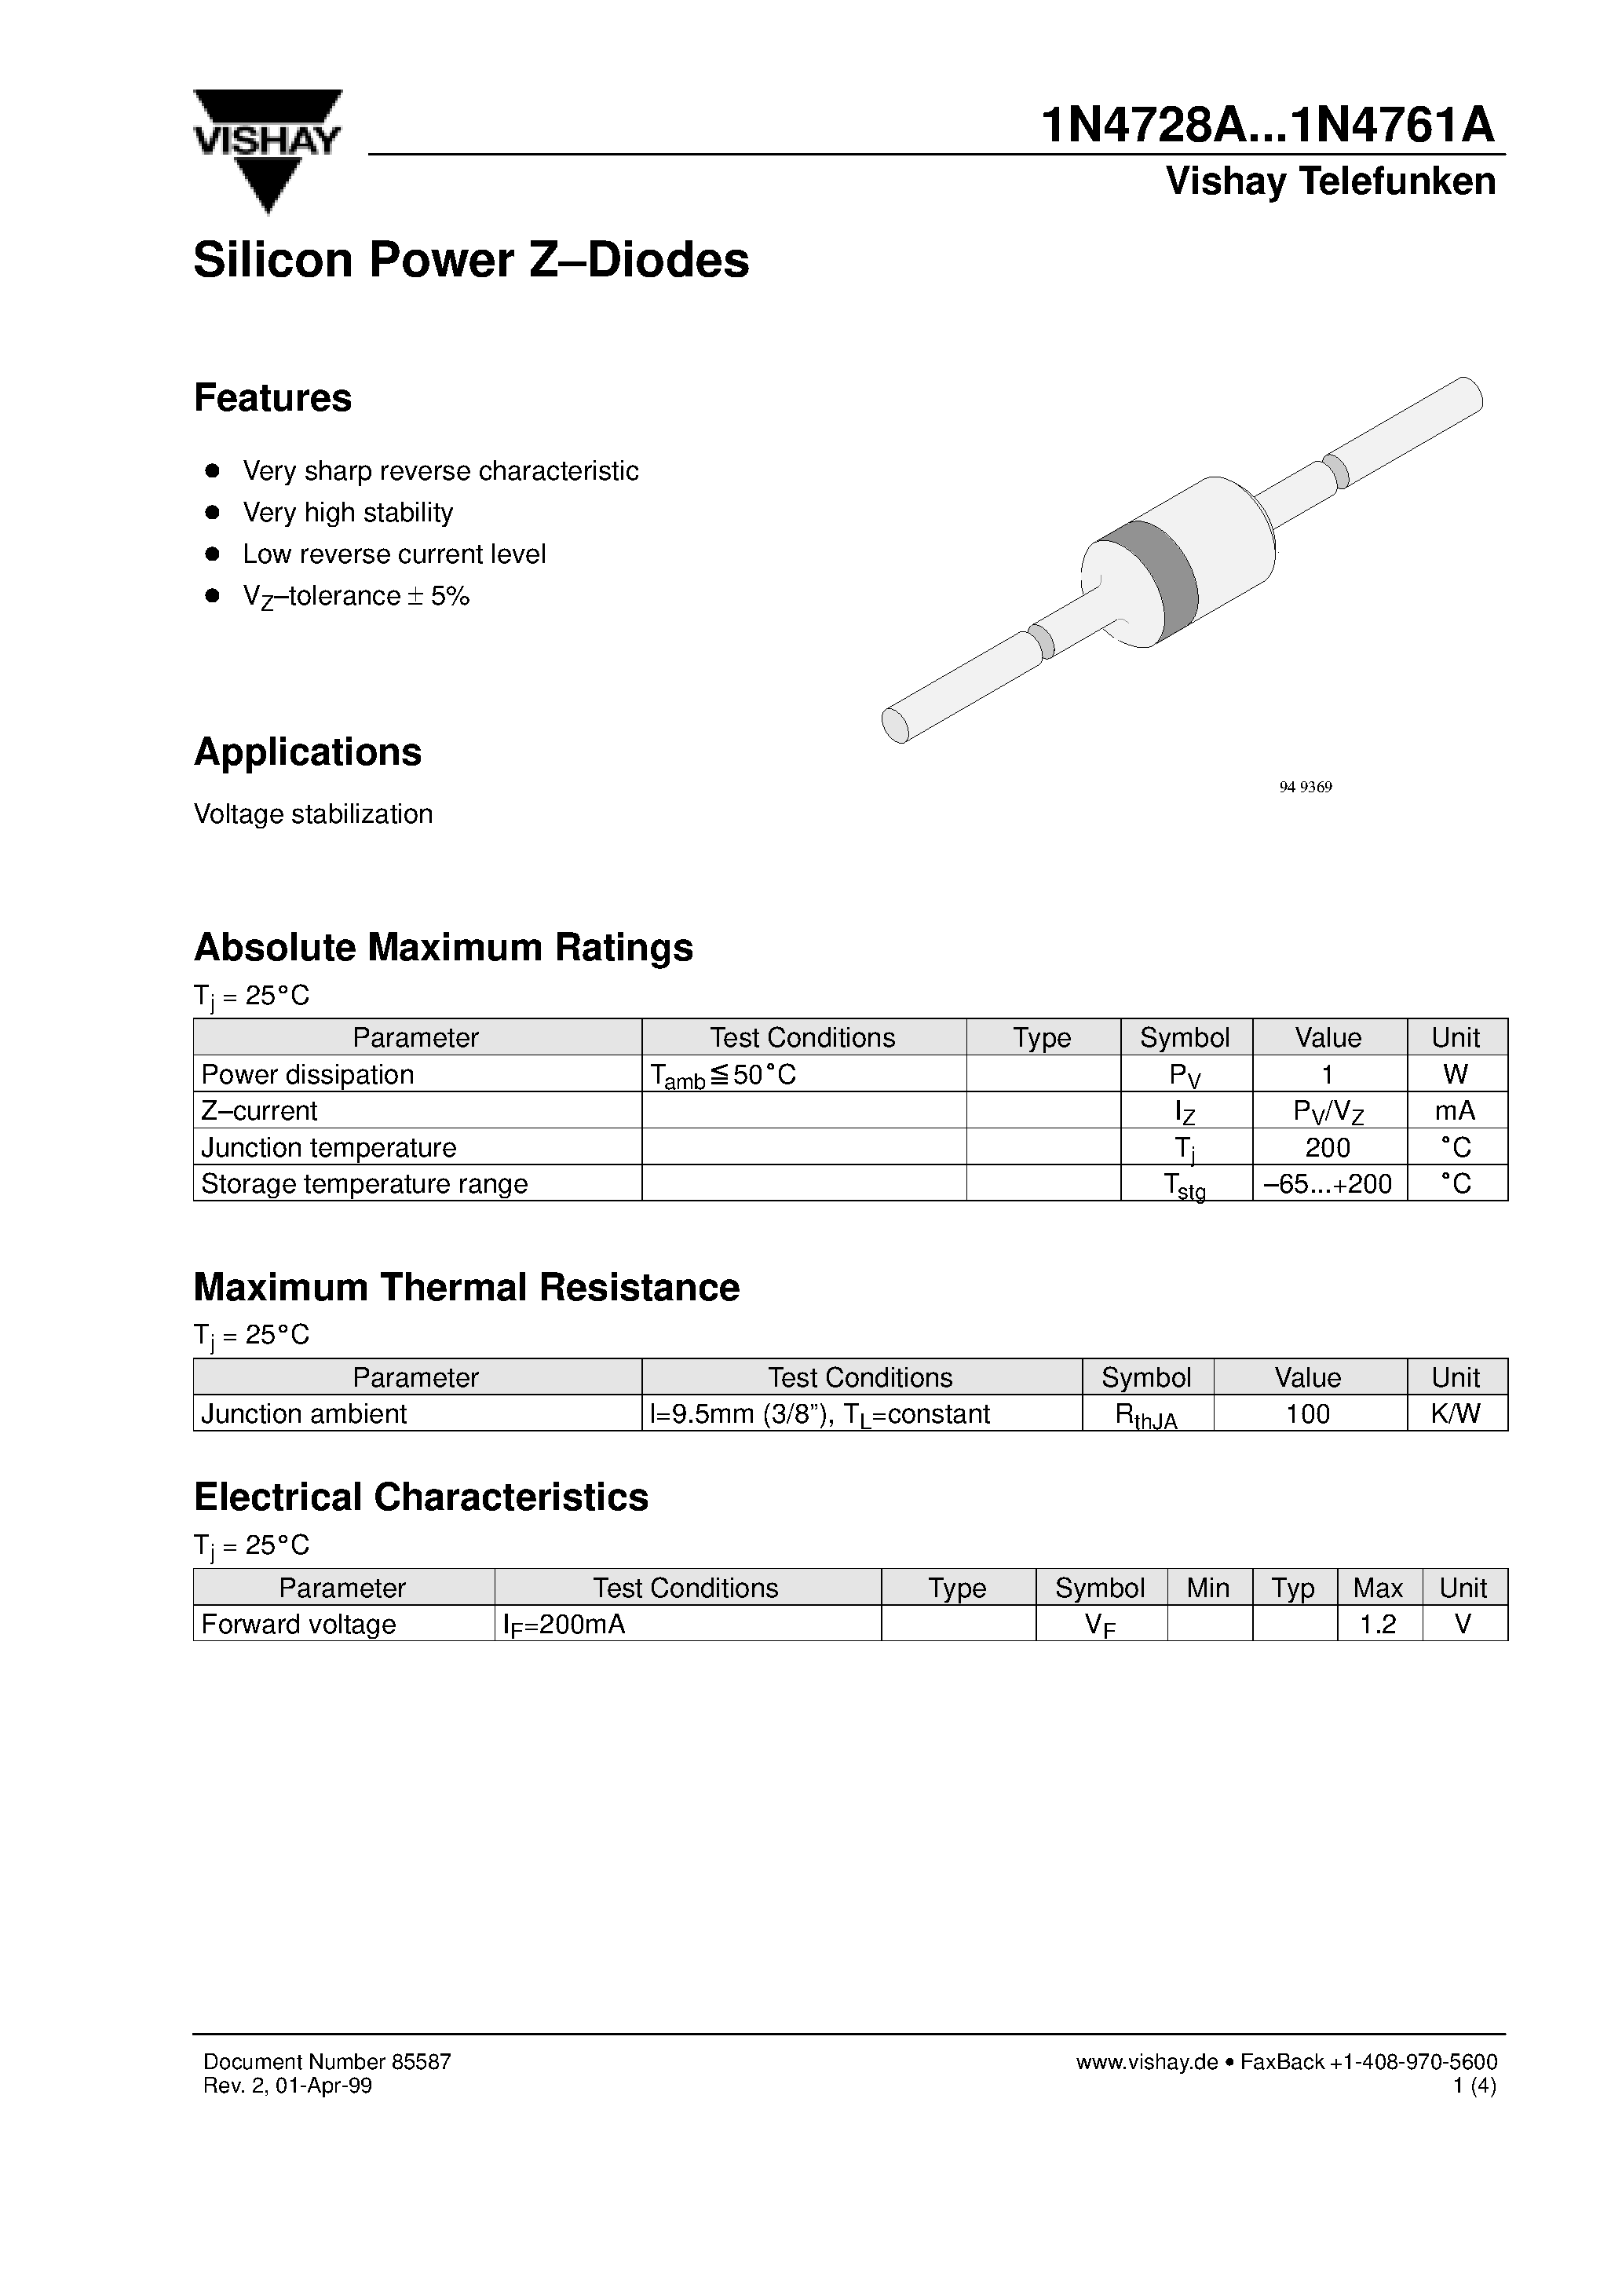 Даташит 1N4744A - Silicon Power Z-Diodes страница 1